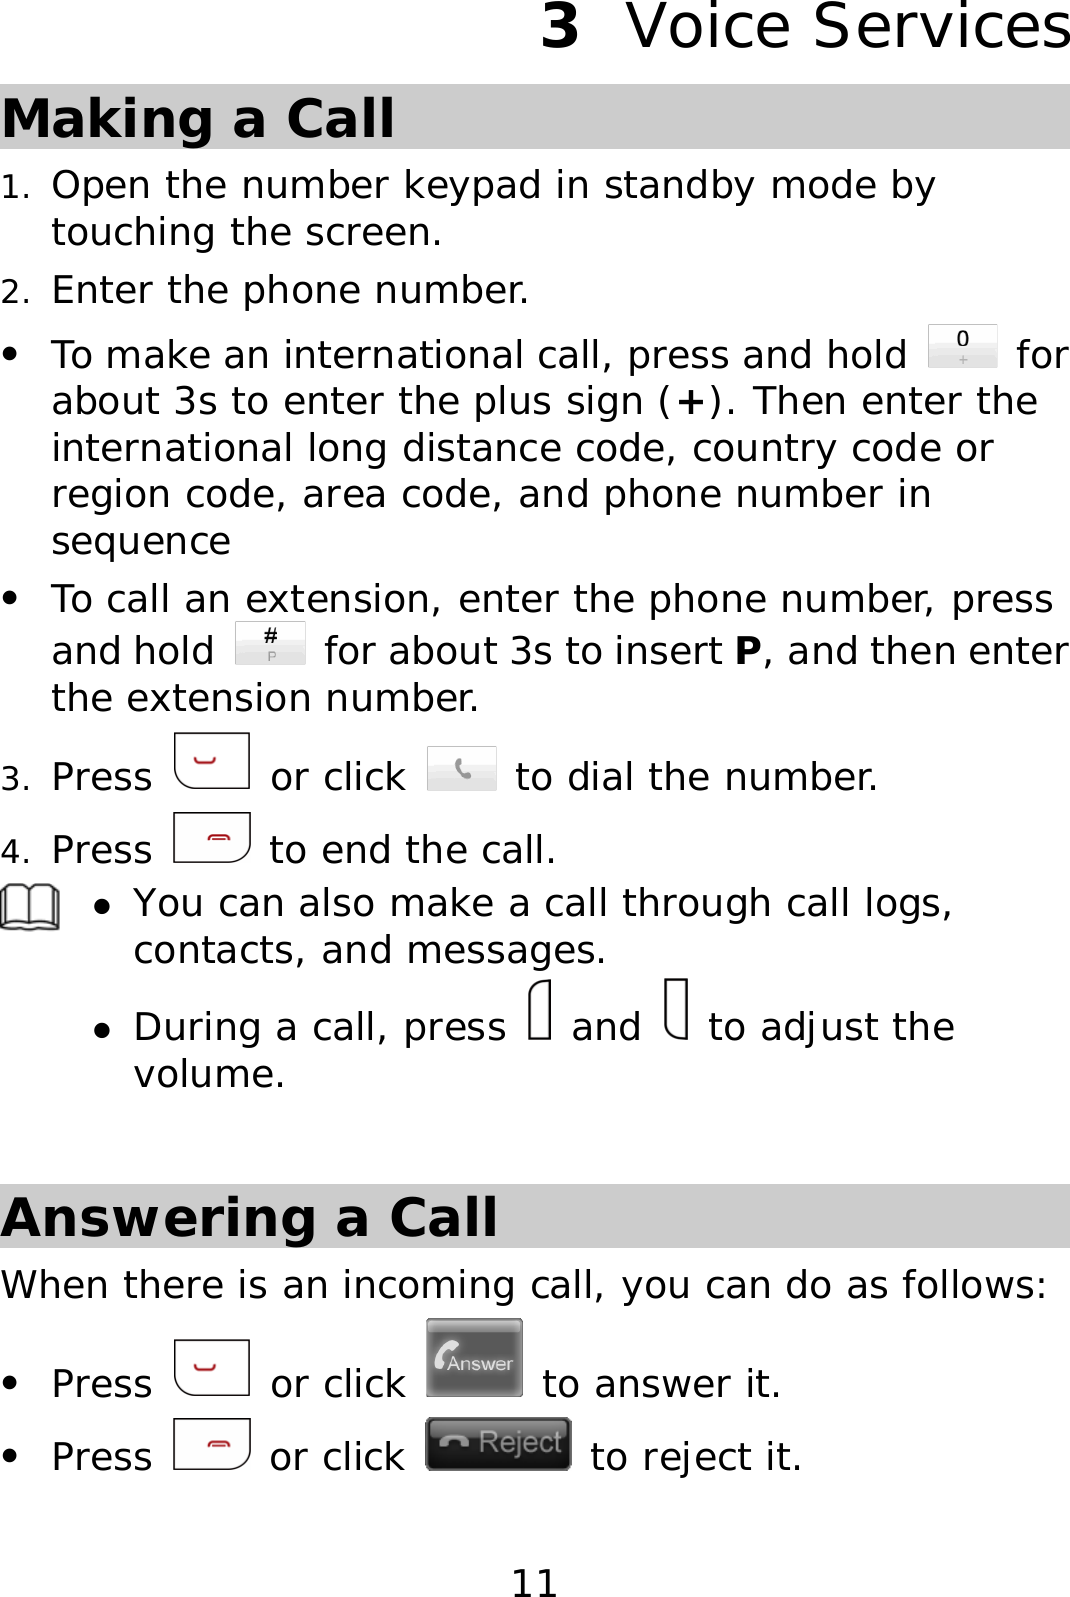 11 3  Voice Services Making a Call 1. Open the number keypad in standby mode by touching the screen. 2. Enter the phone number. z To make an international call, press and hold   for about 3s to enter the plus sign (+). Then enter the international long distance code, country code or region code, area code, and phone number in sequence z To call an extension, enter the phone number, press and hold    for about 3s to insert P, and then enter the extension number. 3. Press   or click   to dial the number. 4. Press   to end the call.  z You can also make a call through call logs, contacts, and messages. z During a call, press   and   to adjust the volume.  Answering a Call When there is an incoming call, you can do as follows: z Press   or click   to answer it. z Press   or click   to reject it. 